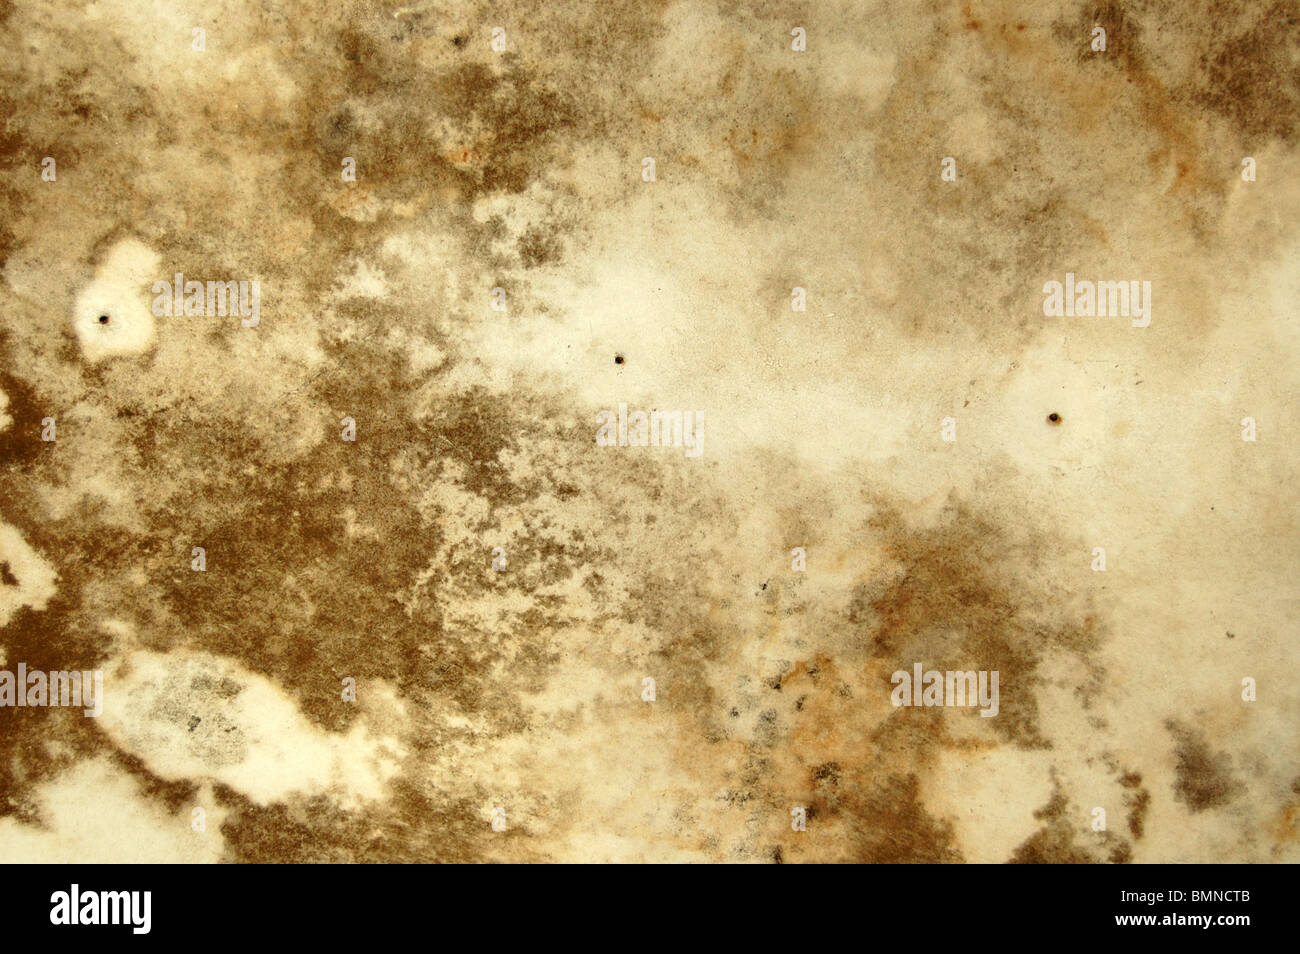 Water Stains And Mold Growth On The Ceiling Of An Abandoned